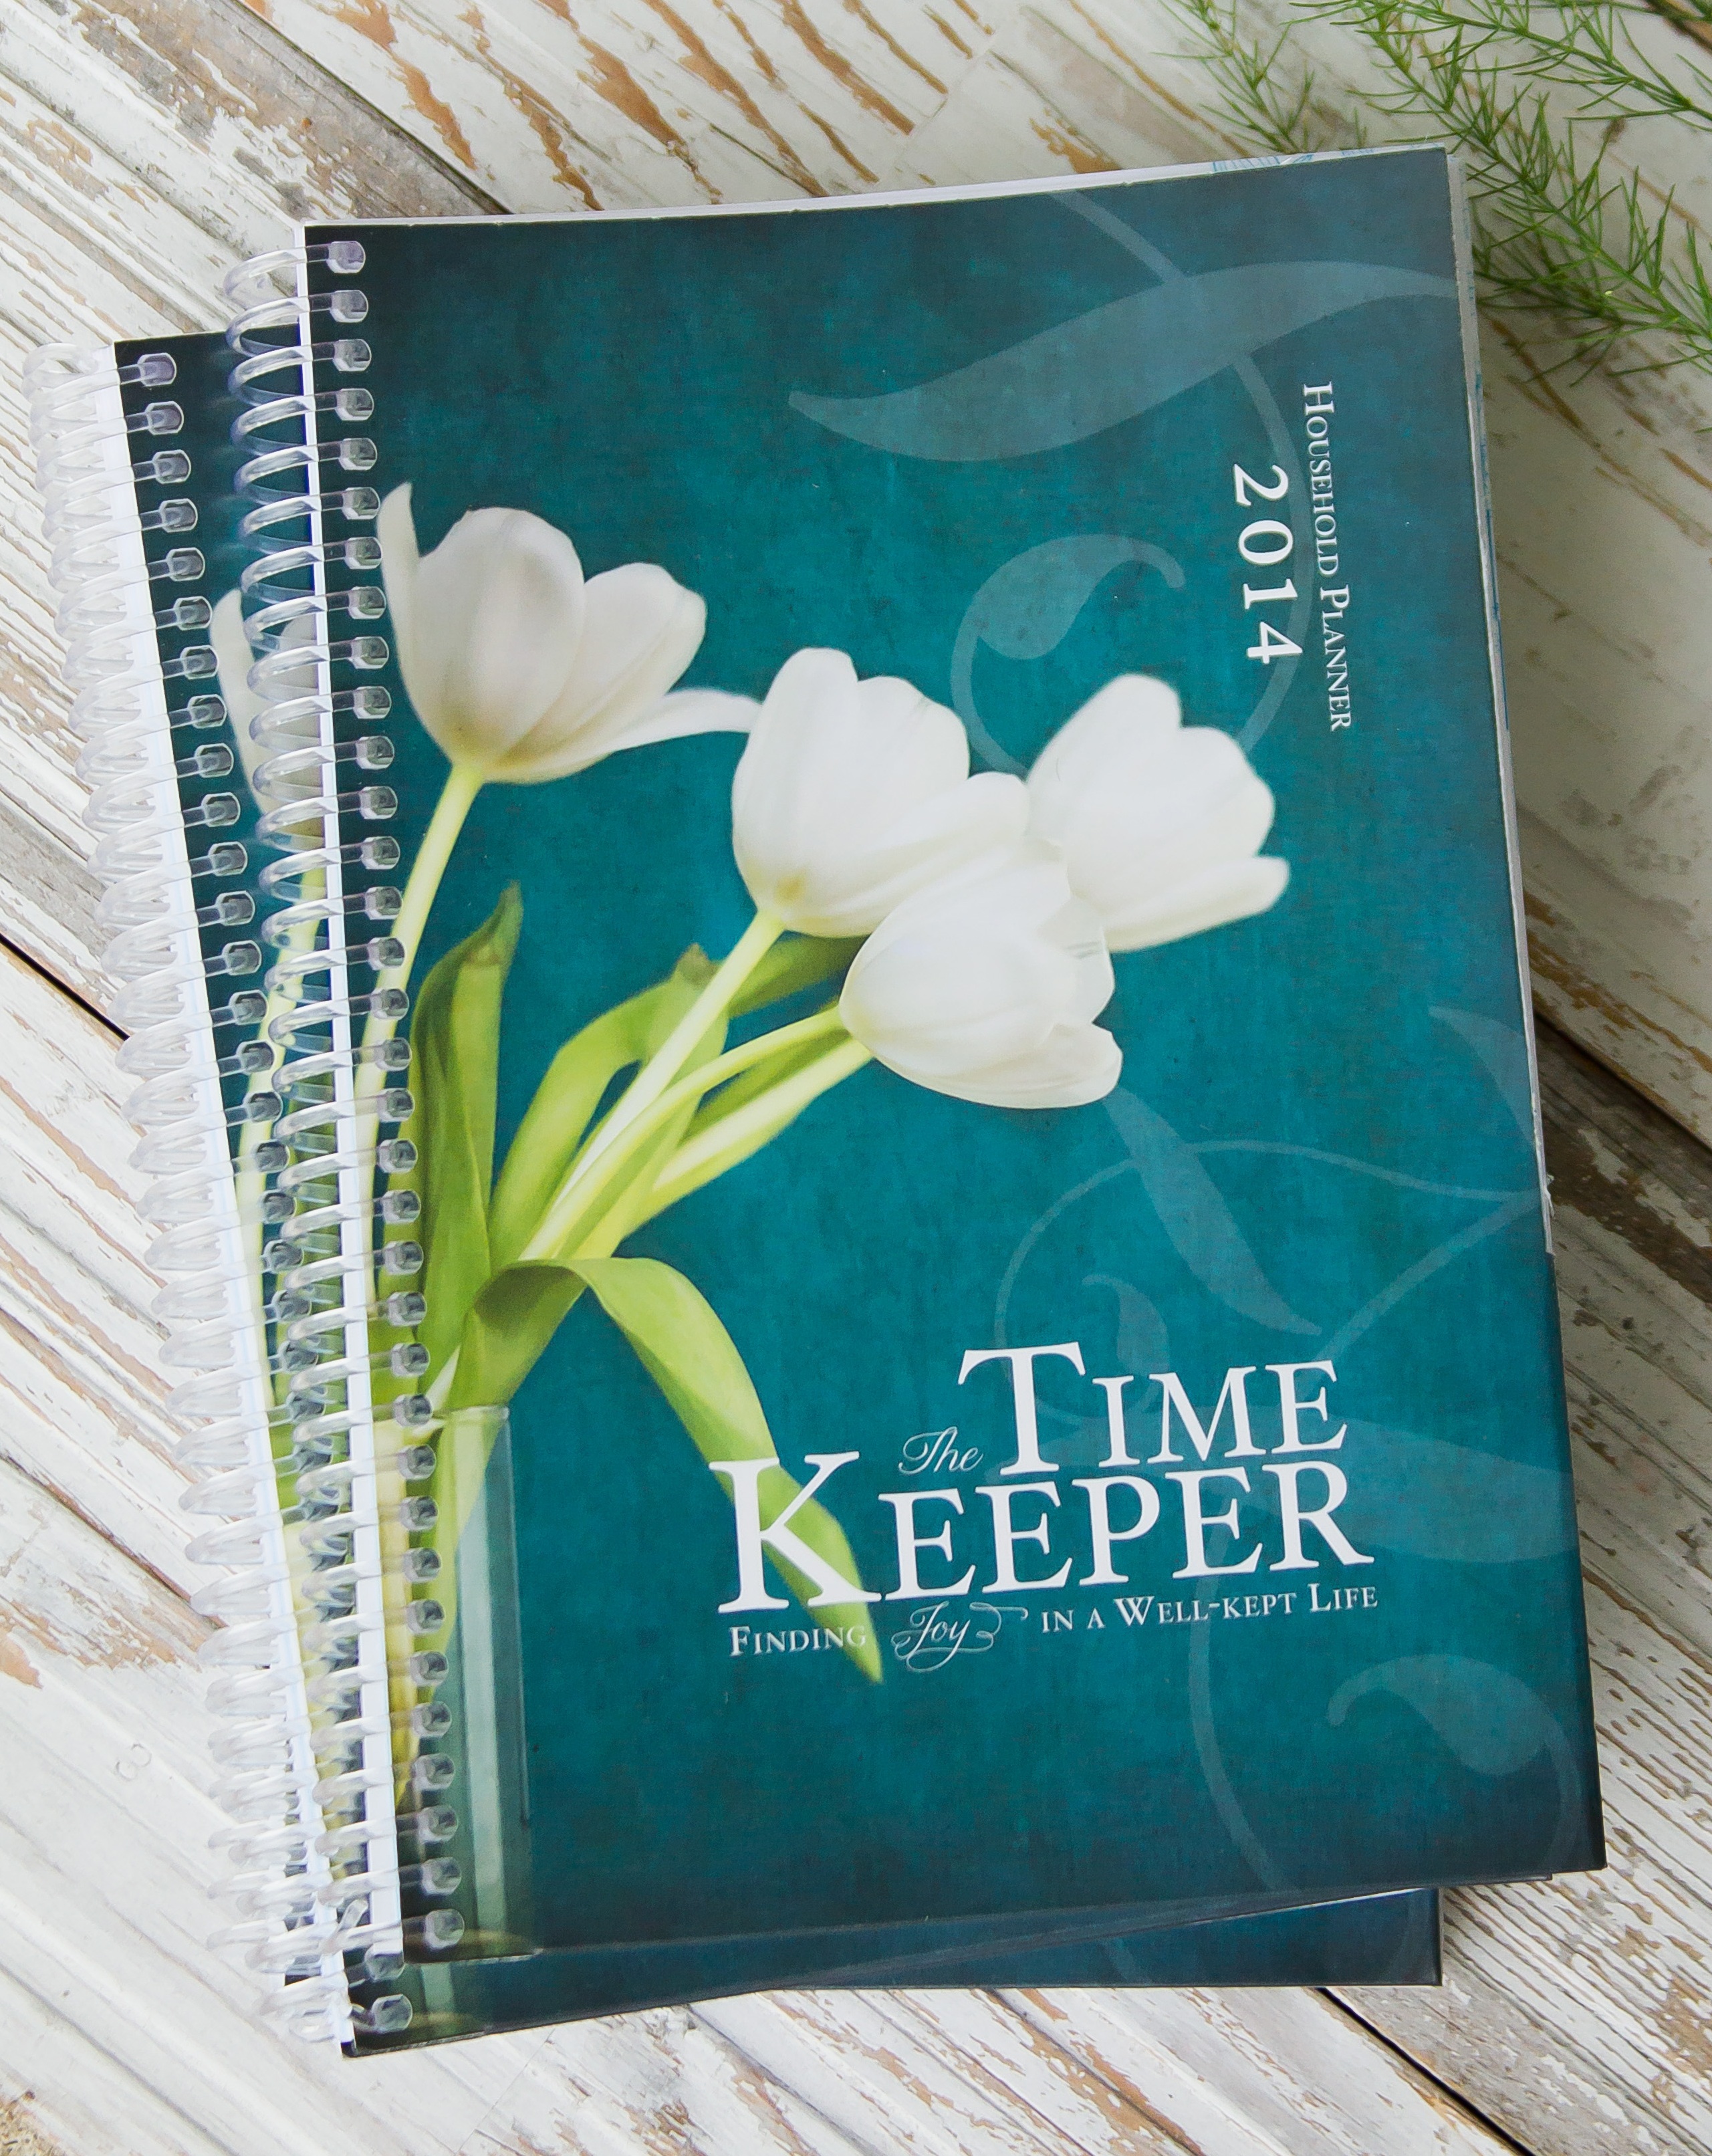 My Favorite Planner: Giveaway! (Plus a link to free organizational printables)